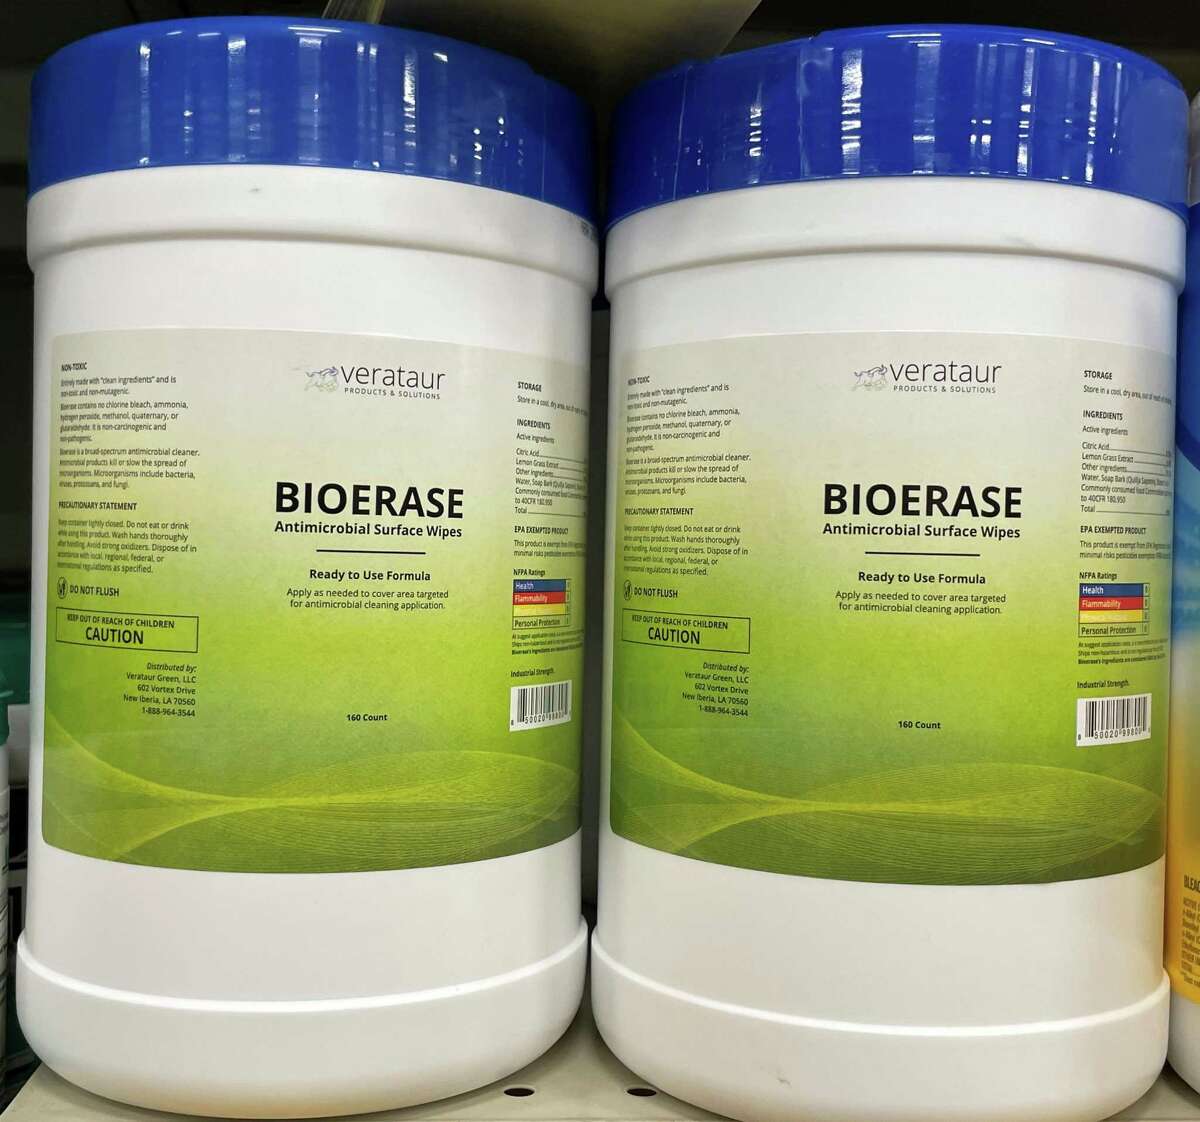 H-E-B has sued a Beaumont company that supplied it BioErasure antimicrobial surface wipes. Maverick International Ltd. is accused of delivering canisters late and far short of the number H-E-B ordered.